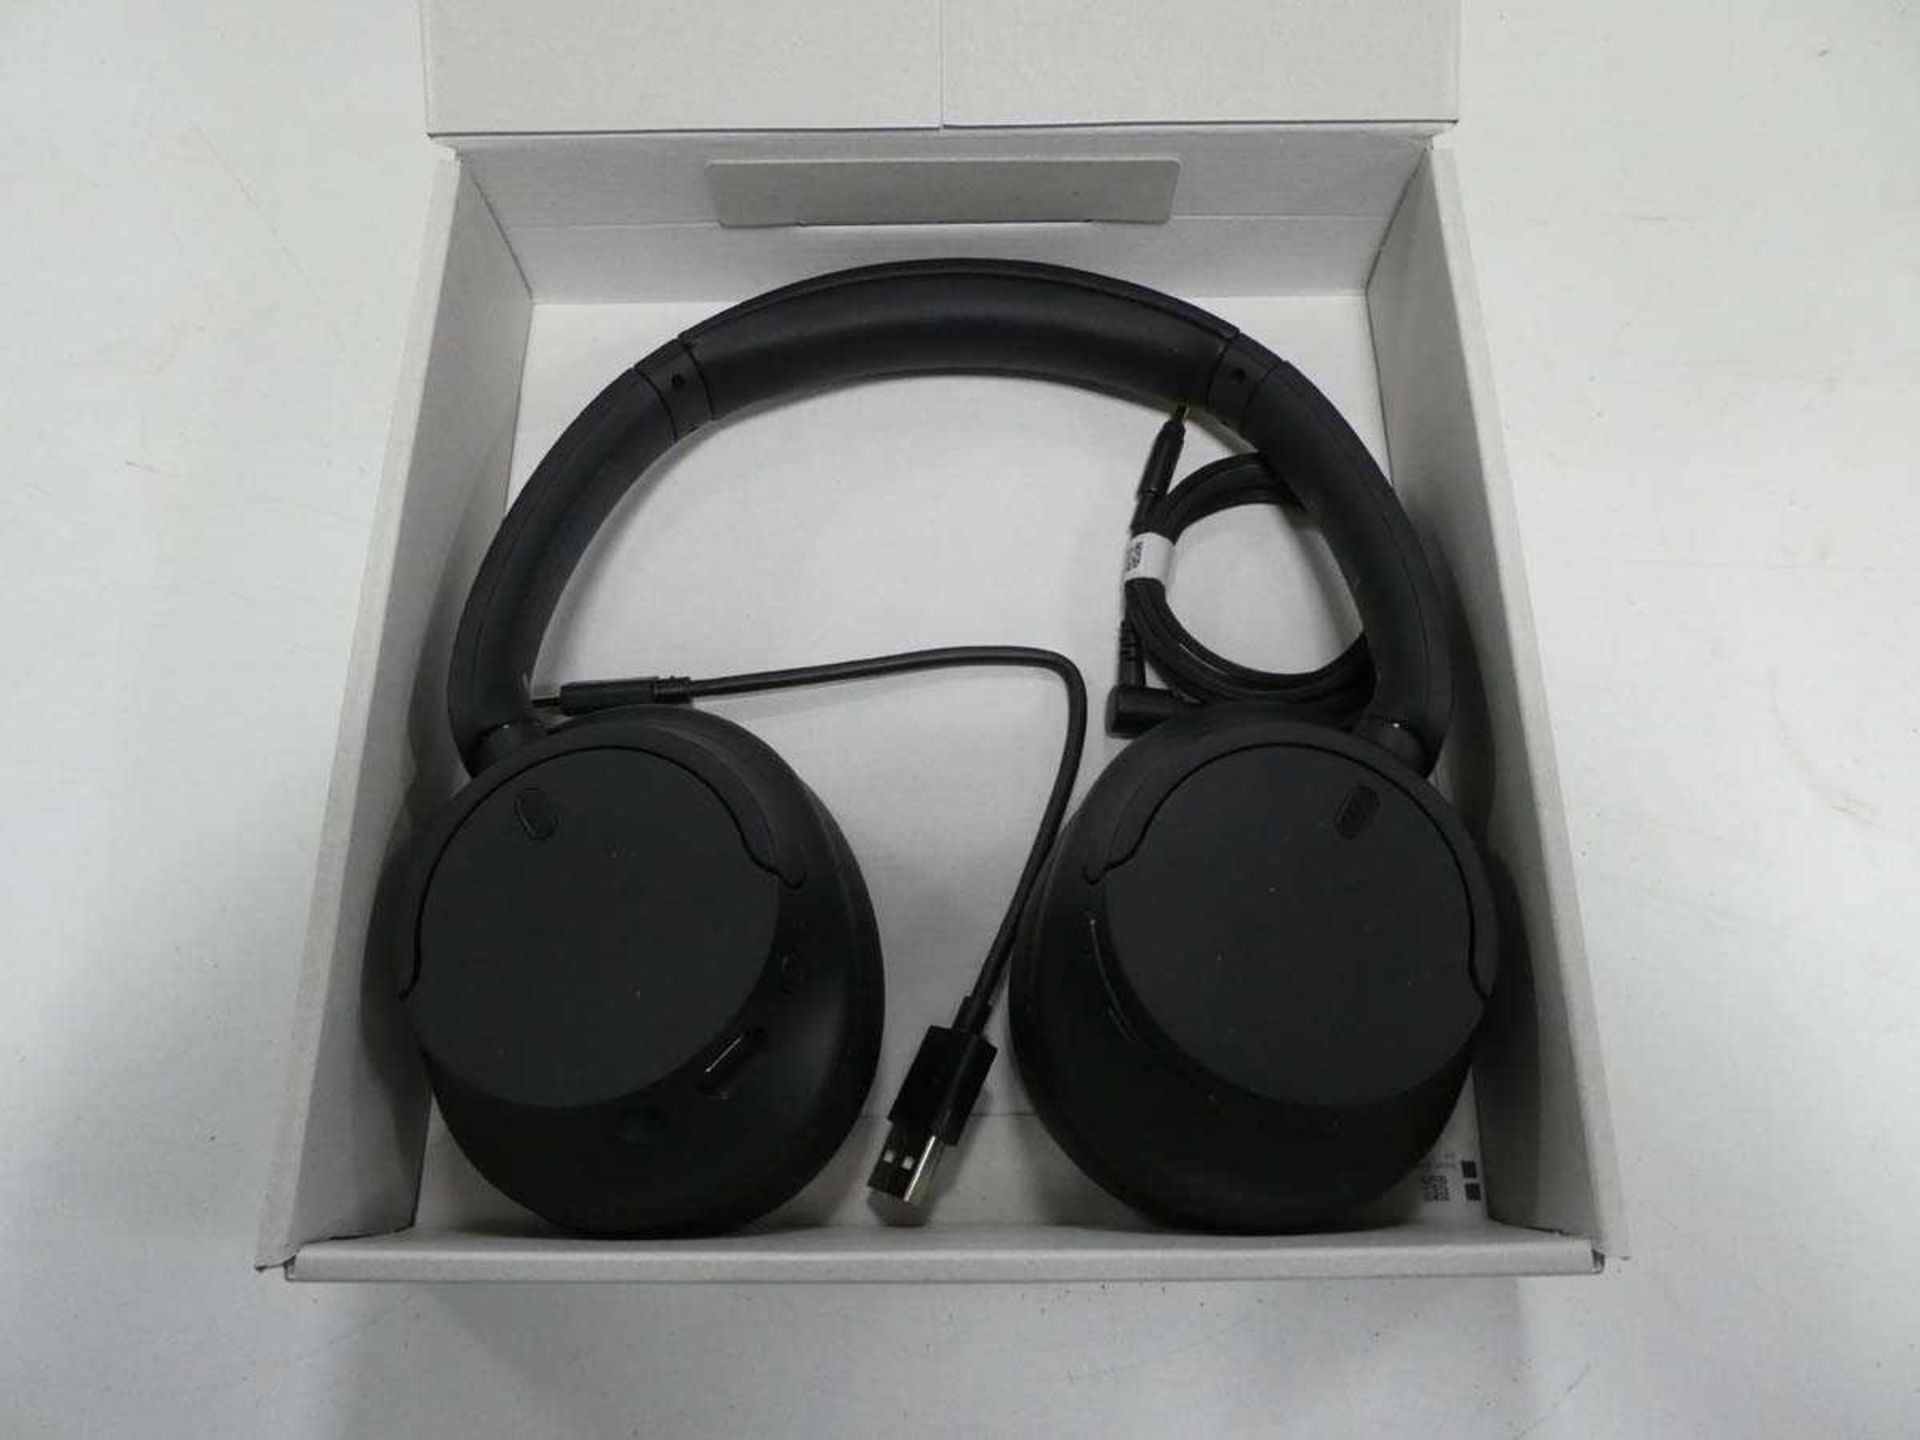 Pair of Sony WHCH720N noise cancelling headphones - Image 2 of 2